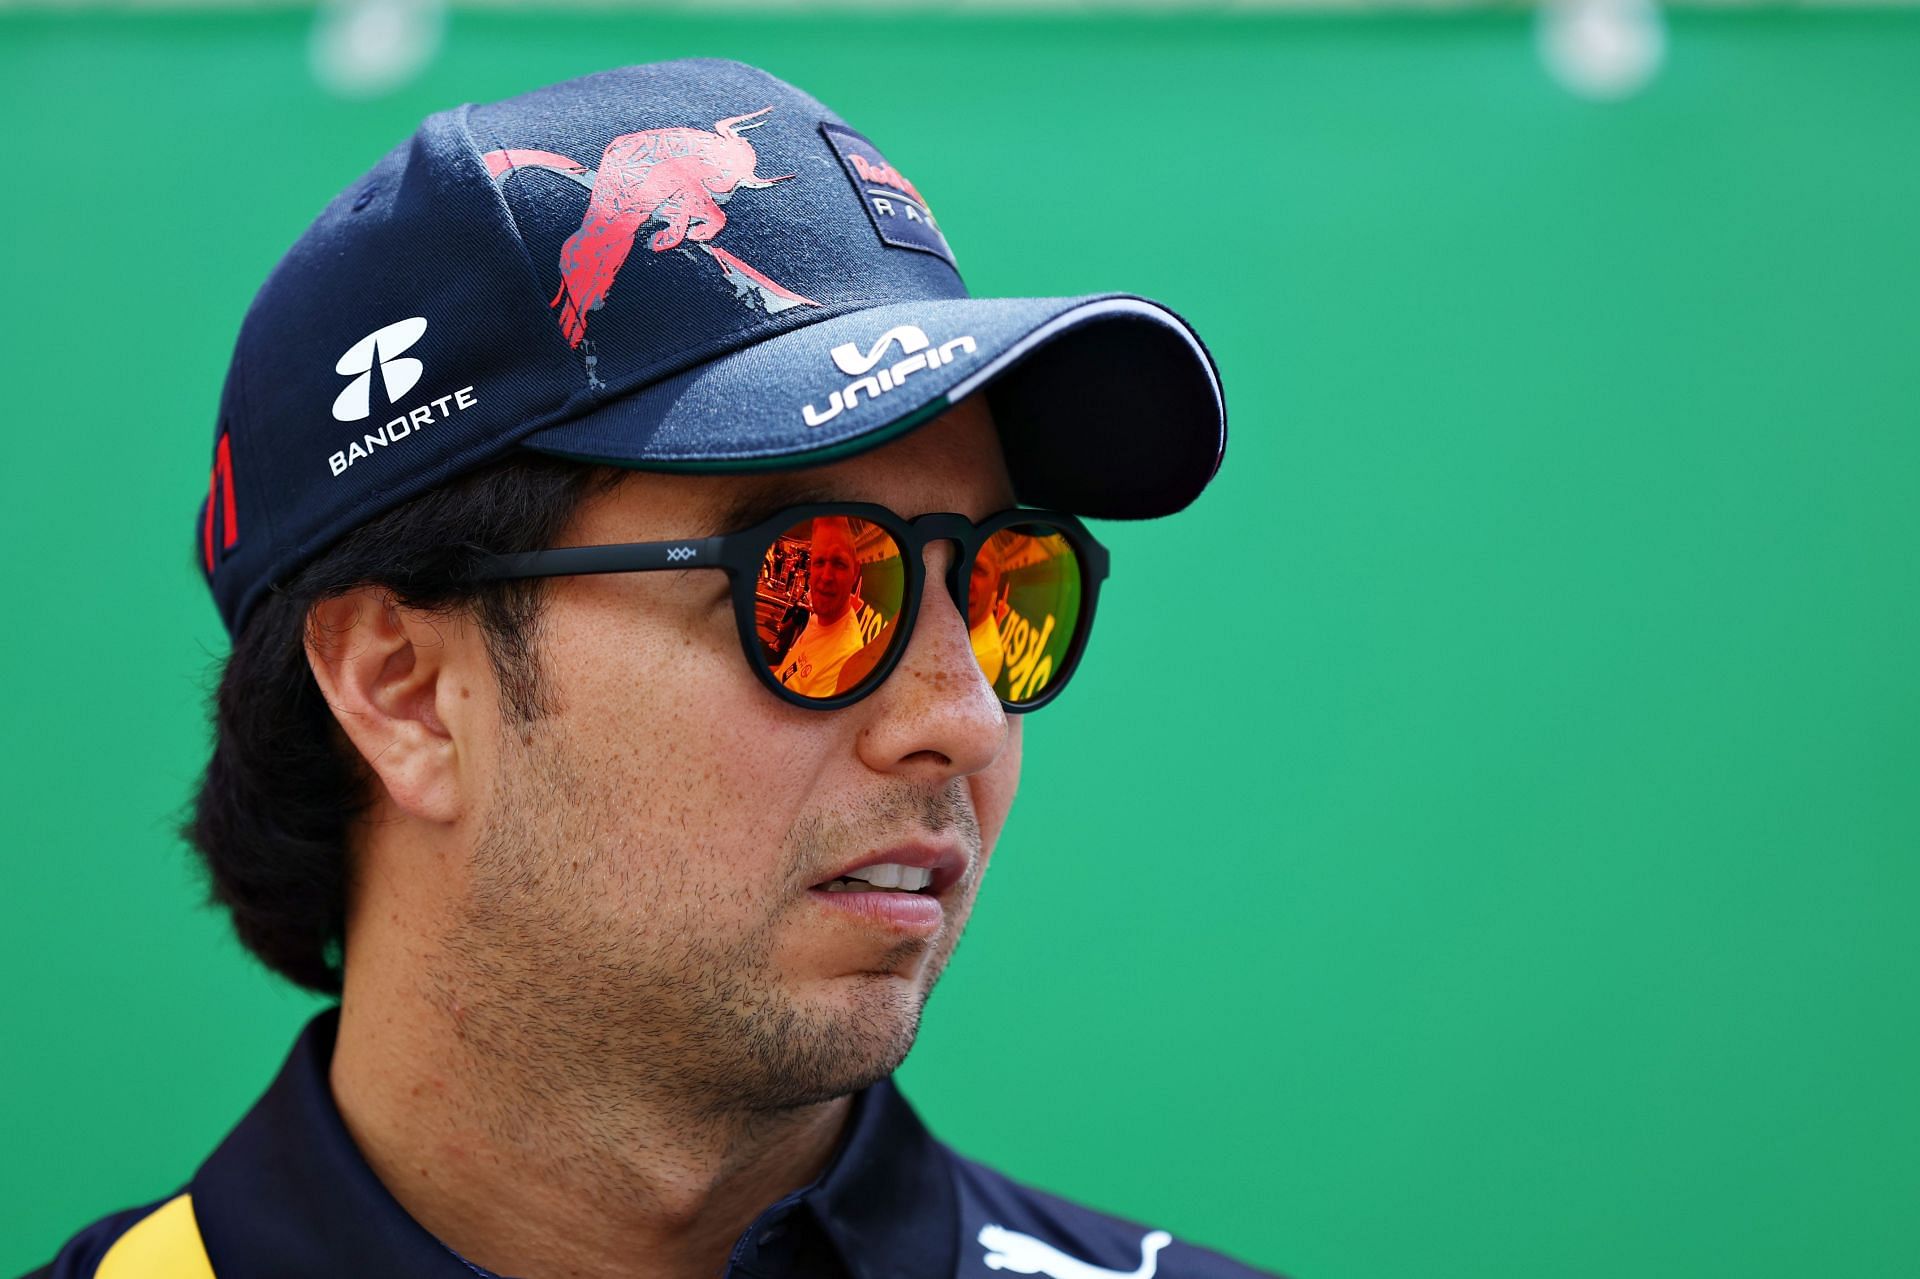 Sergio Perez blames 'people not respecting the deltas' as the reason behind his Q3 crash at 2022 F1 Monaco GP qualifying